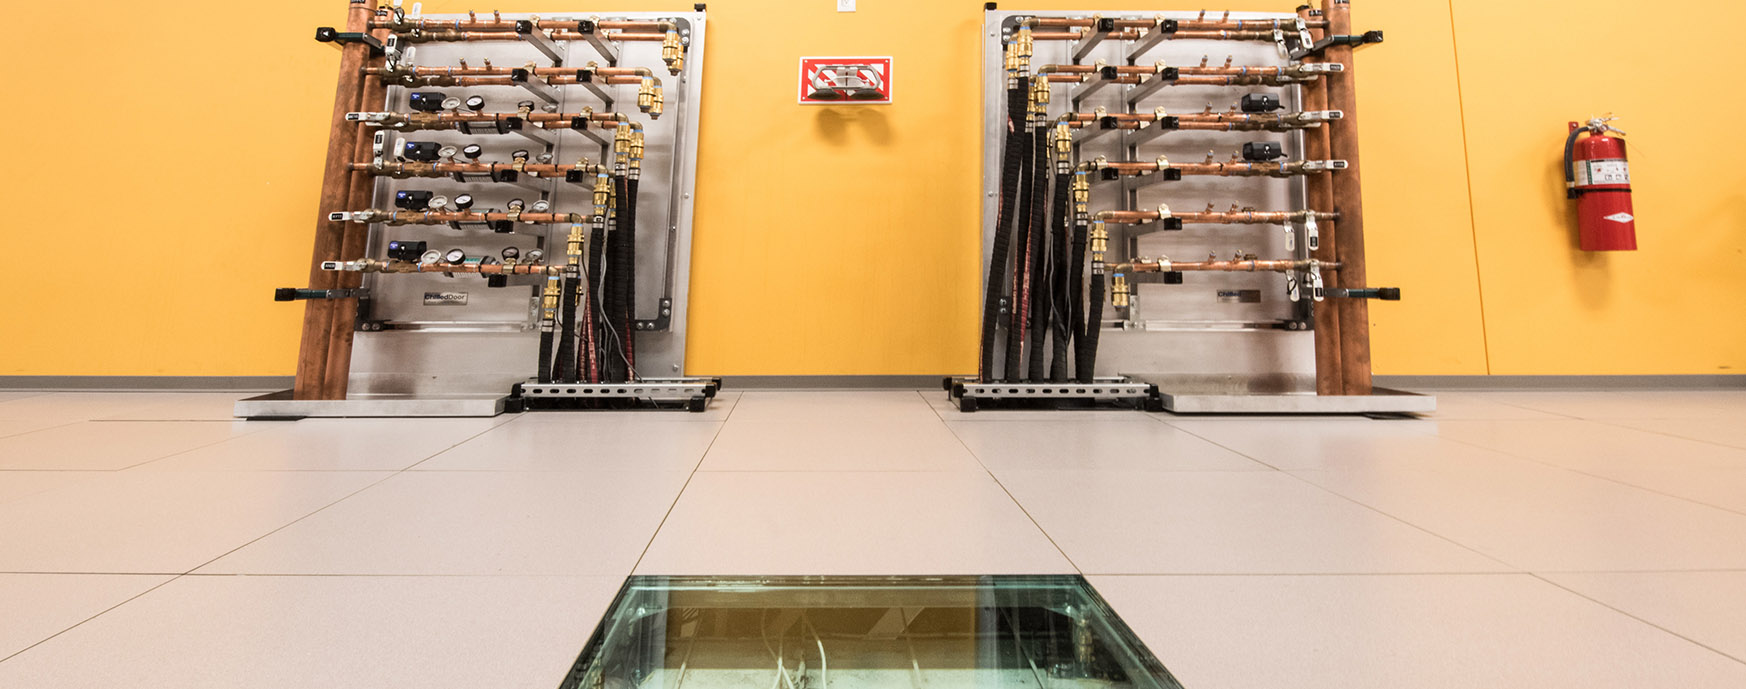 Photo of hot aisle containment manifolds in data center providing energy recovery water